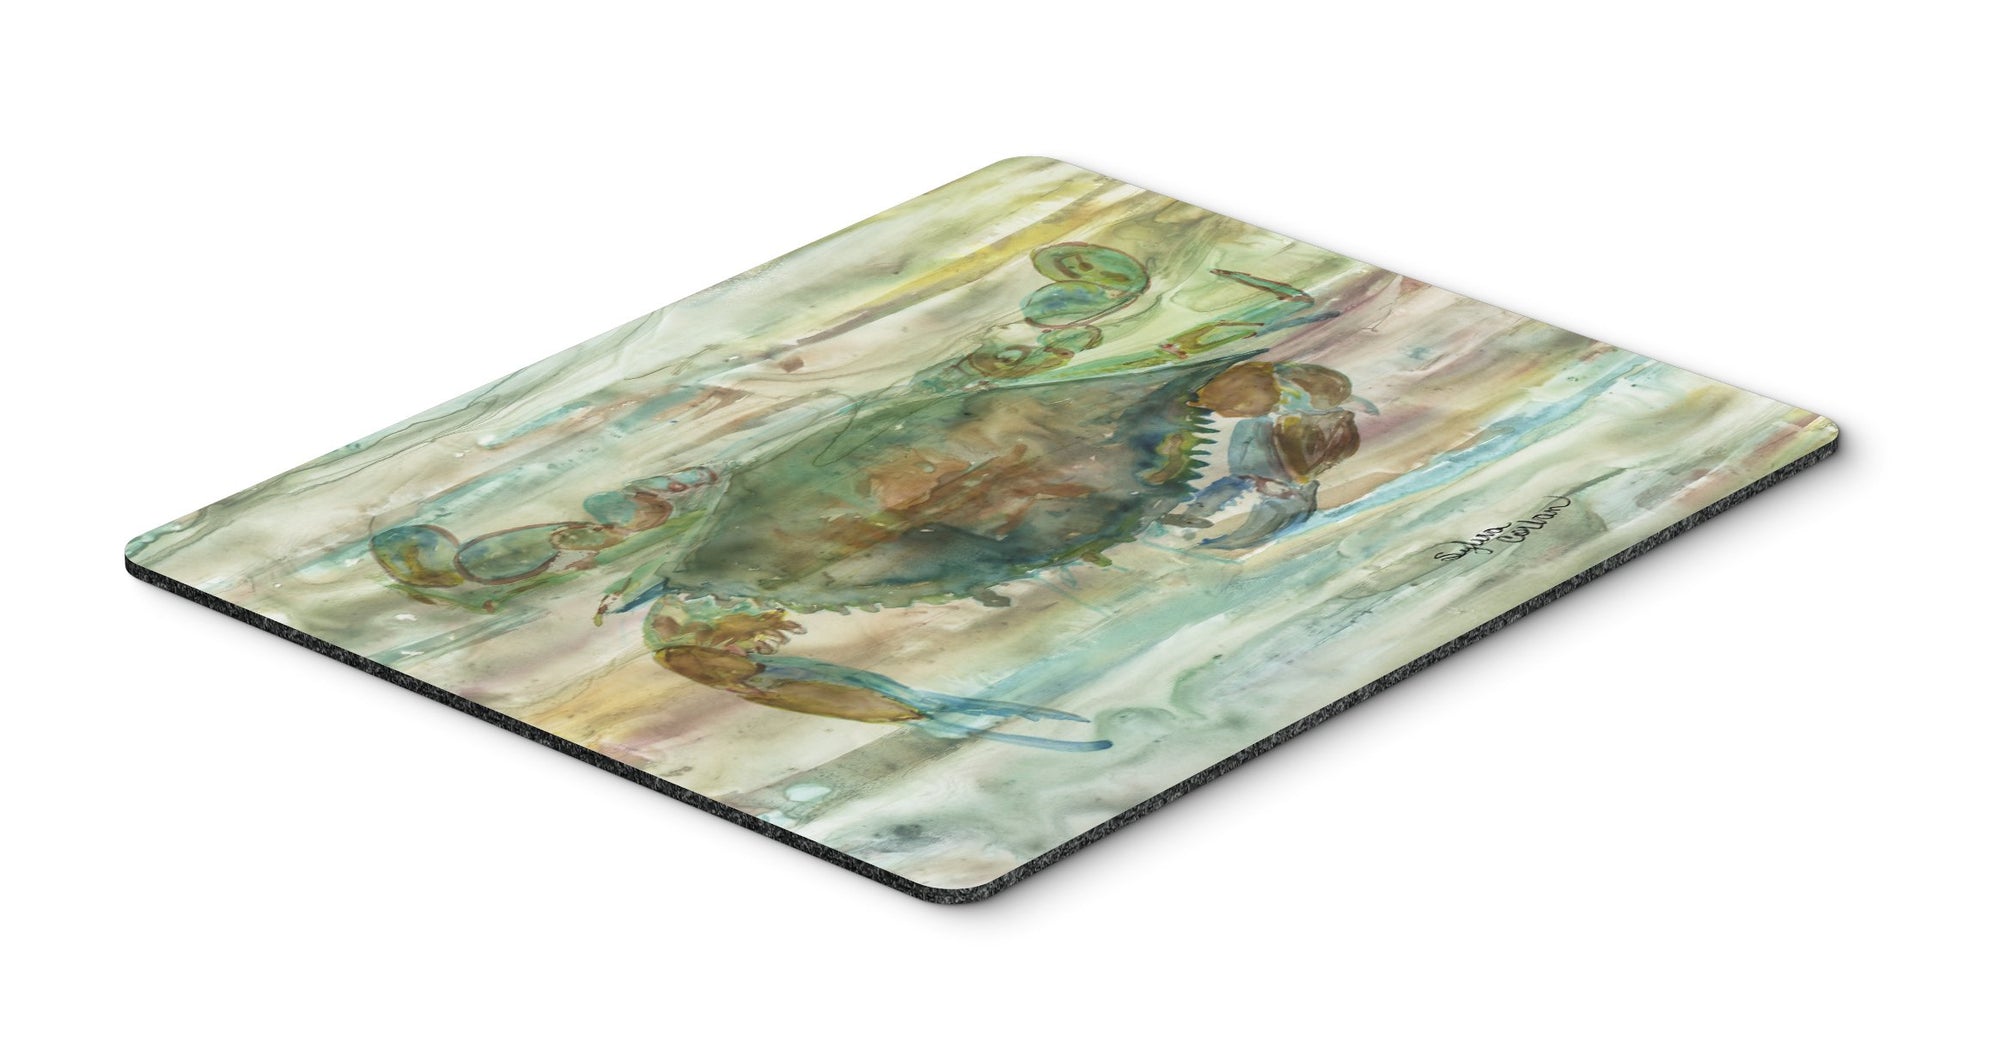 Crab a leg up Sunset Mouse Pad, Hot Pad or Trivet SC2015MP by Caroline's Treasures